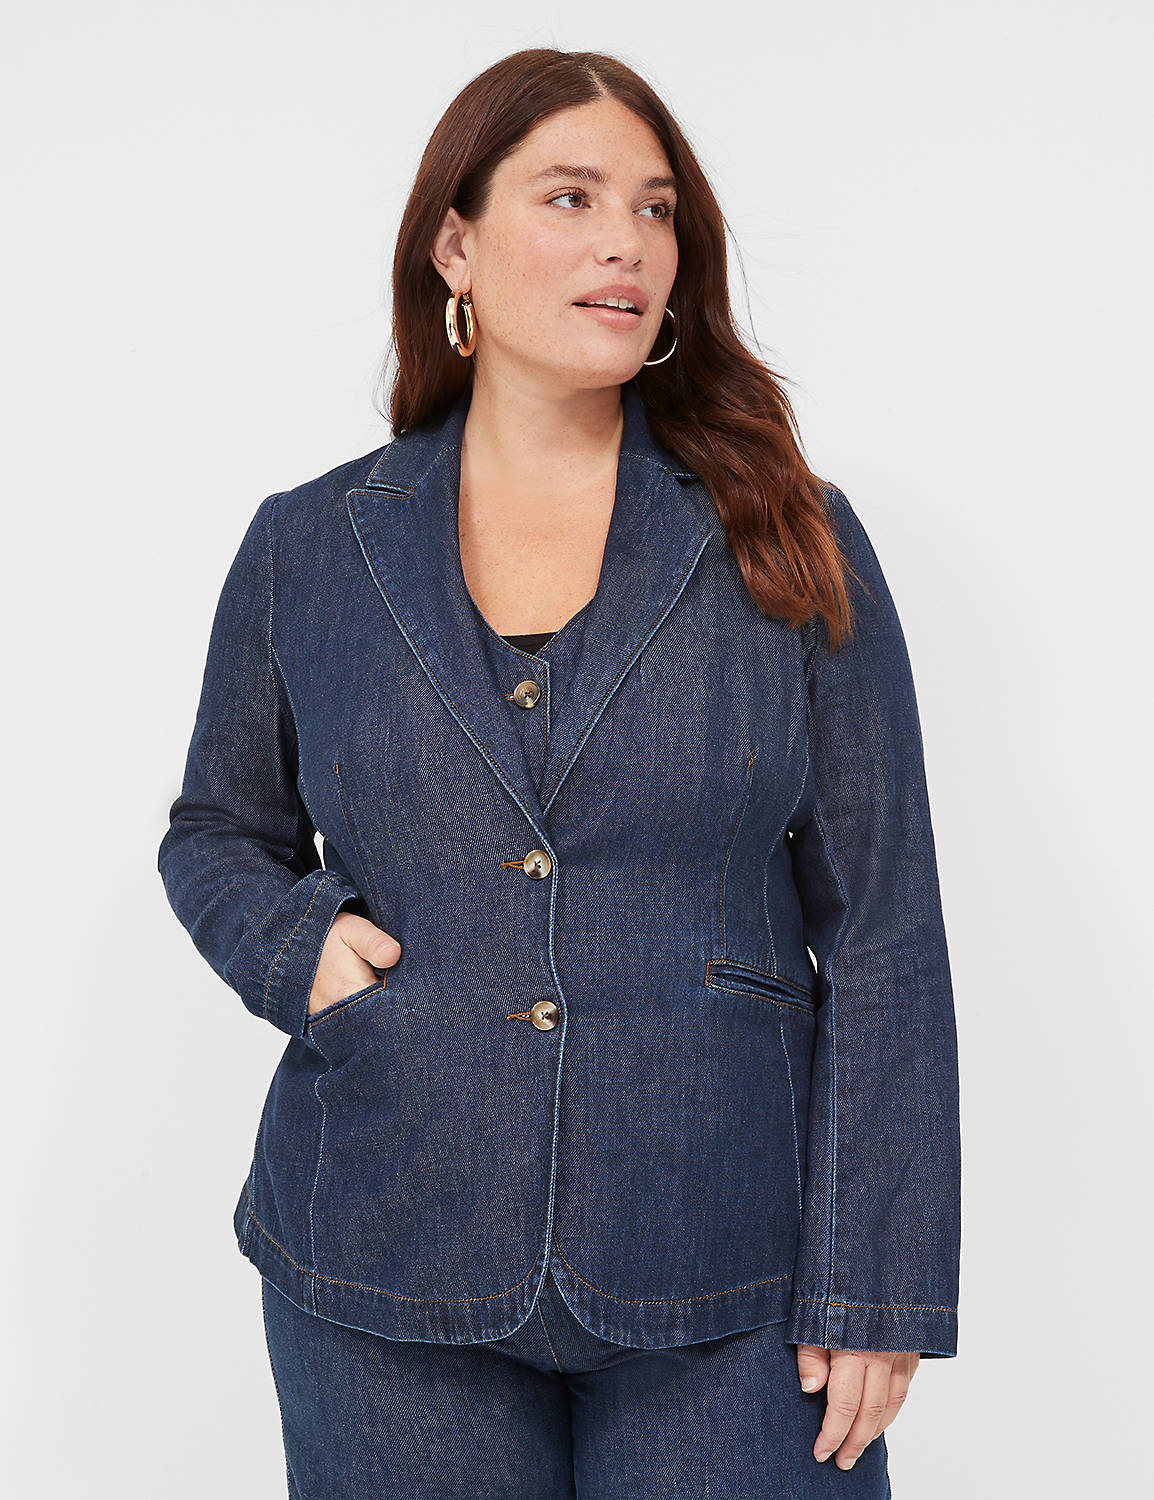 FITTED DENIM BLAZER - RINSE 1138869 Product Image 1